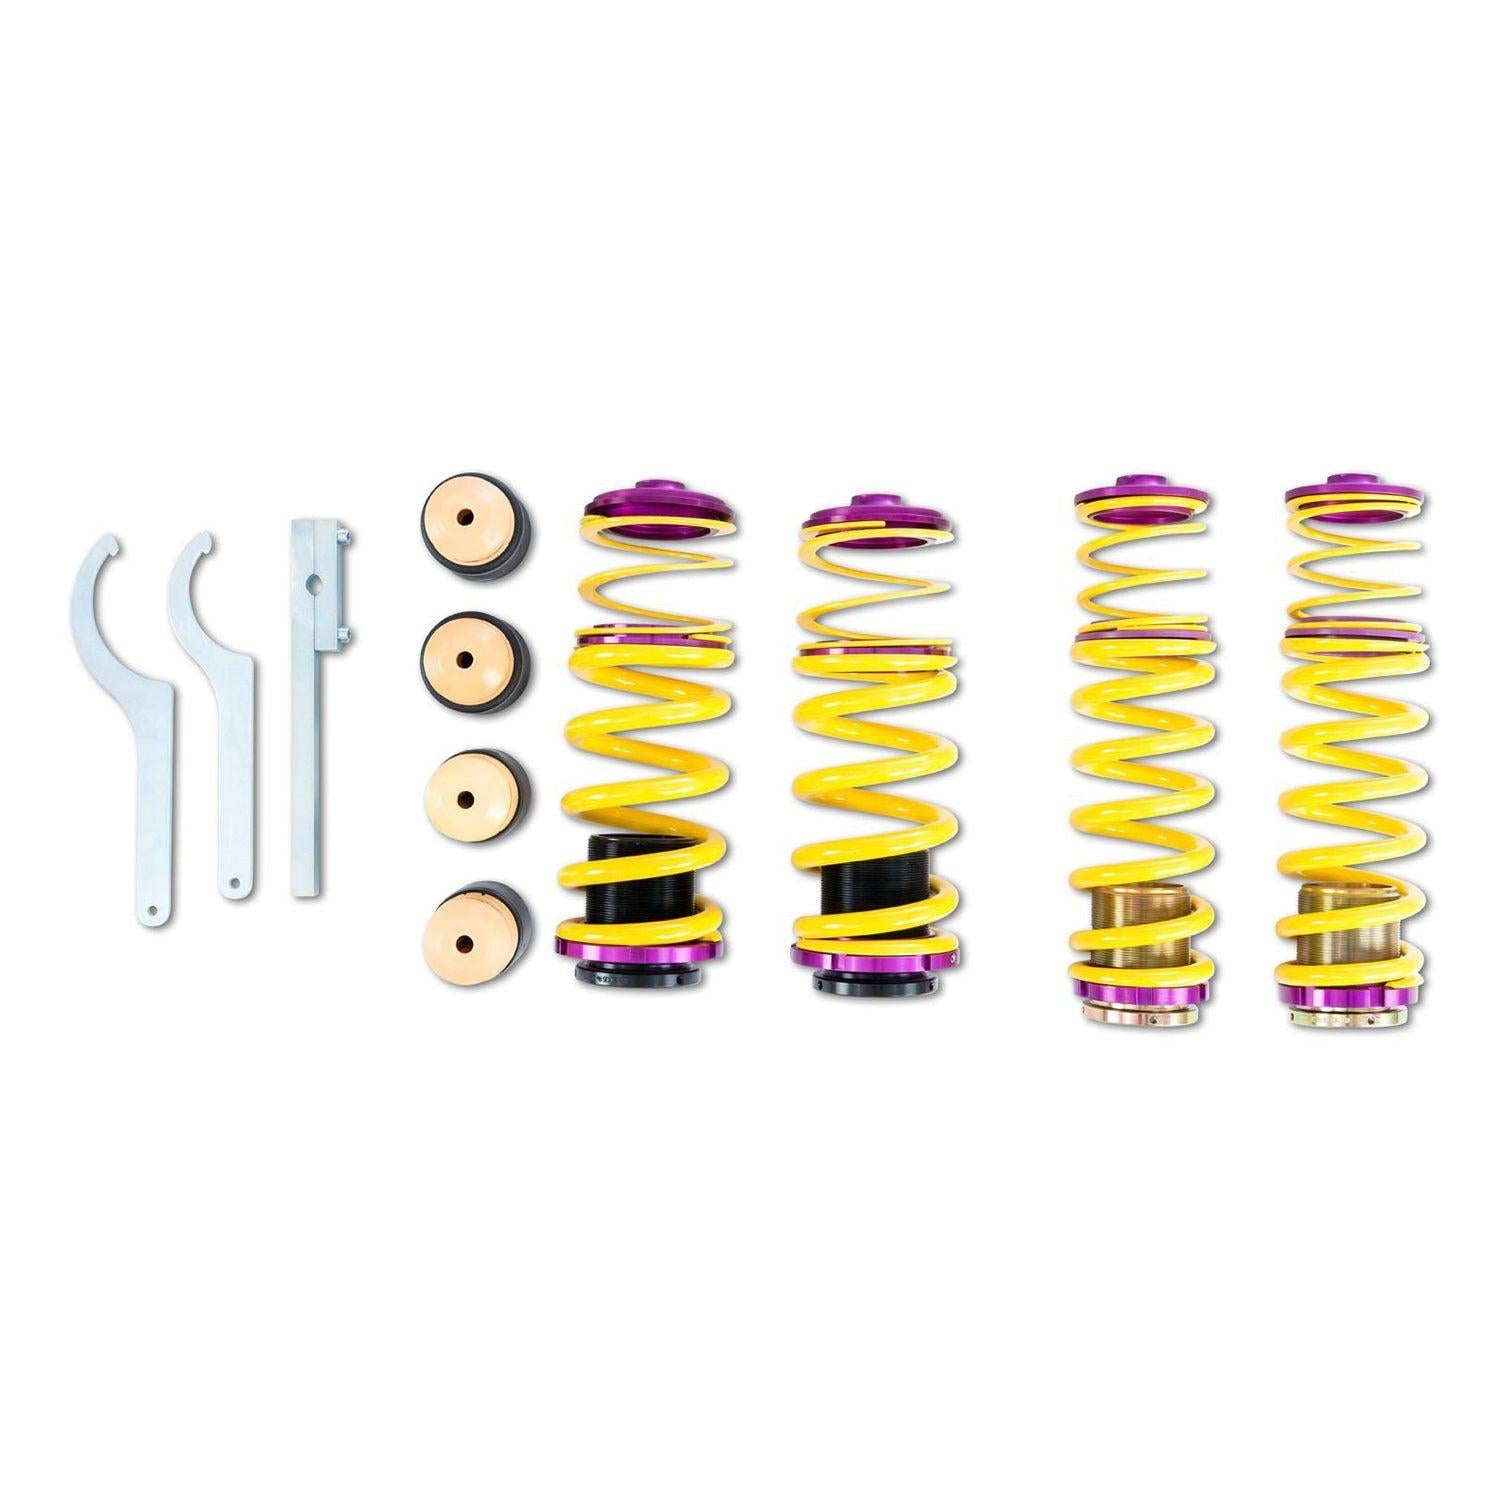 KW Mercedes C-Class Height Adjustable Lowering Spring Kit (205) Non-EDC-R44 Performance